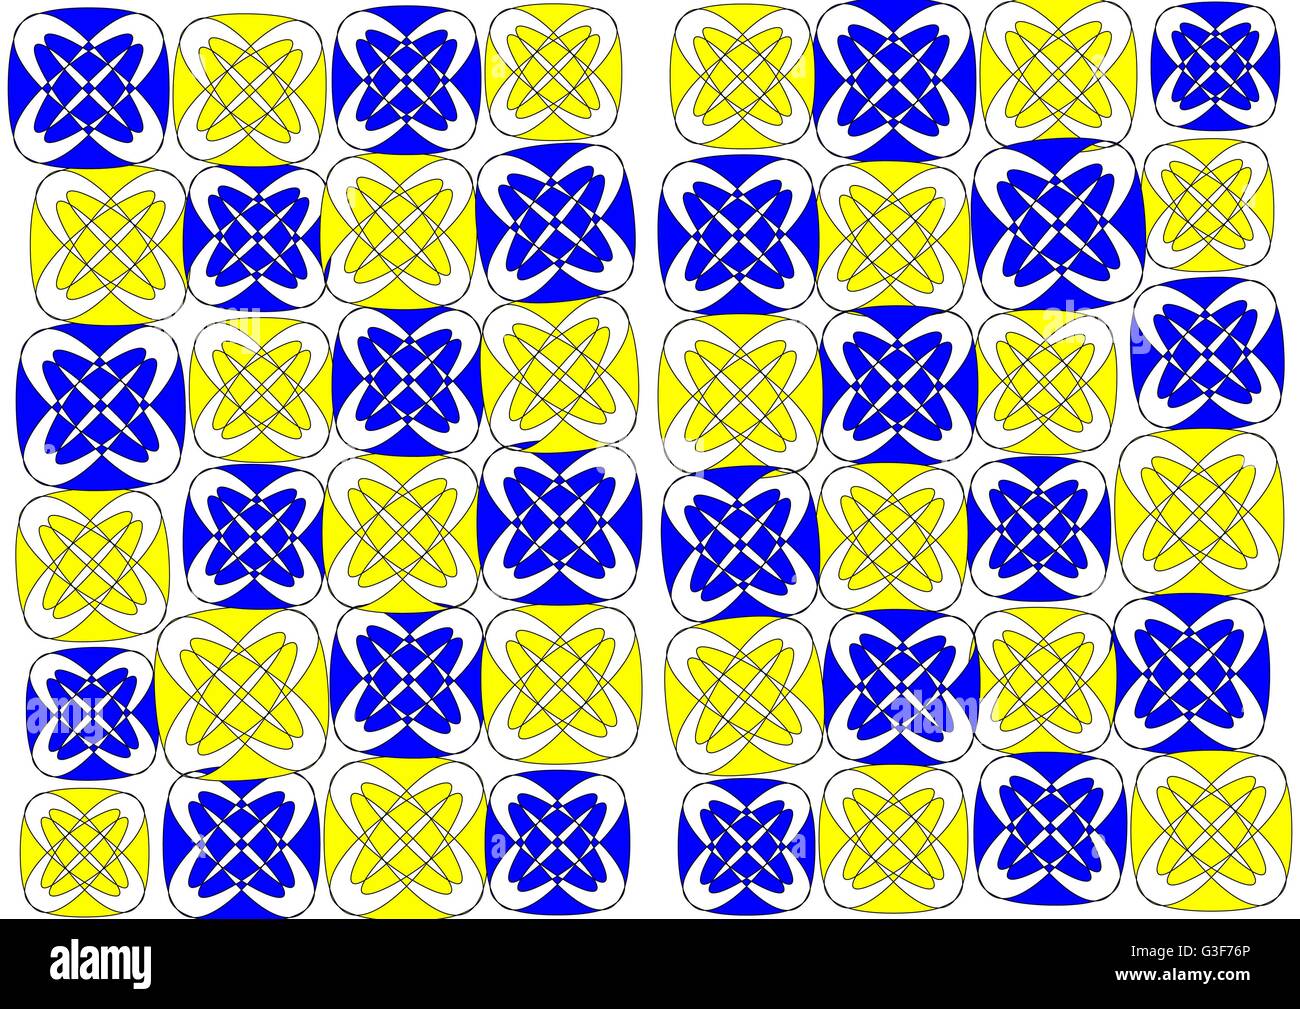 Stunning geometric abstract design suitable for wallpapers and backgrounds with yellow blue  grey  and white superimposed colour scheme . Stock Photo